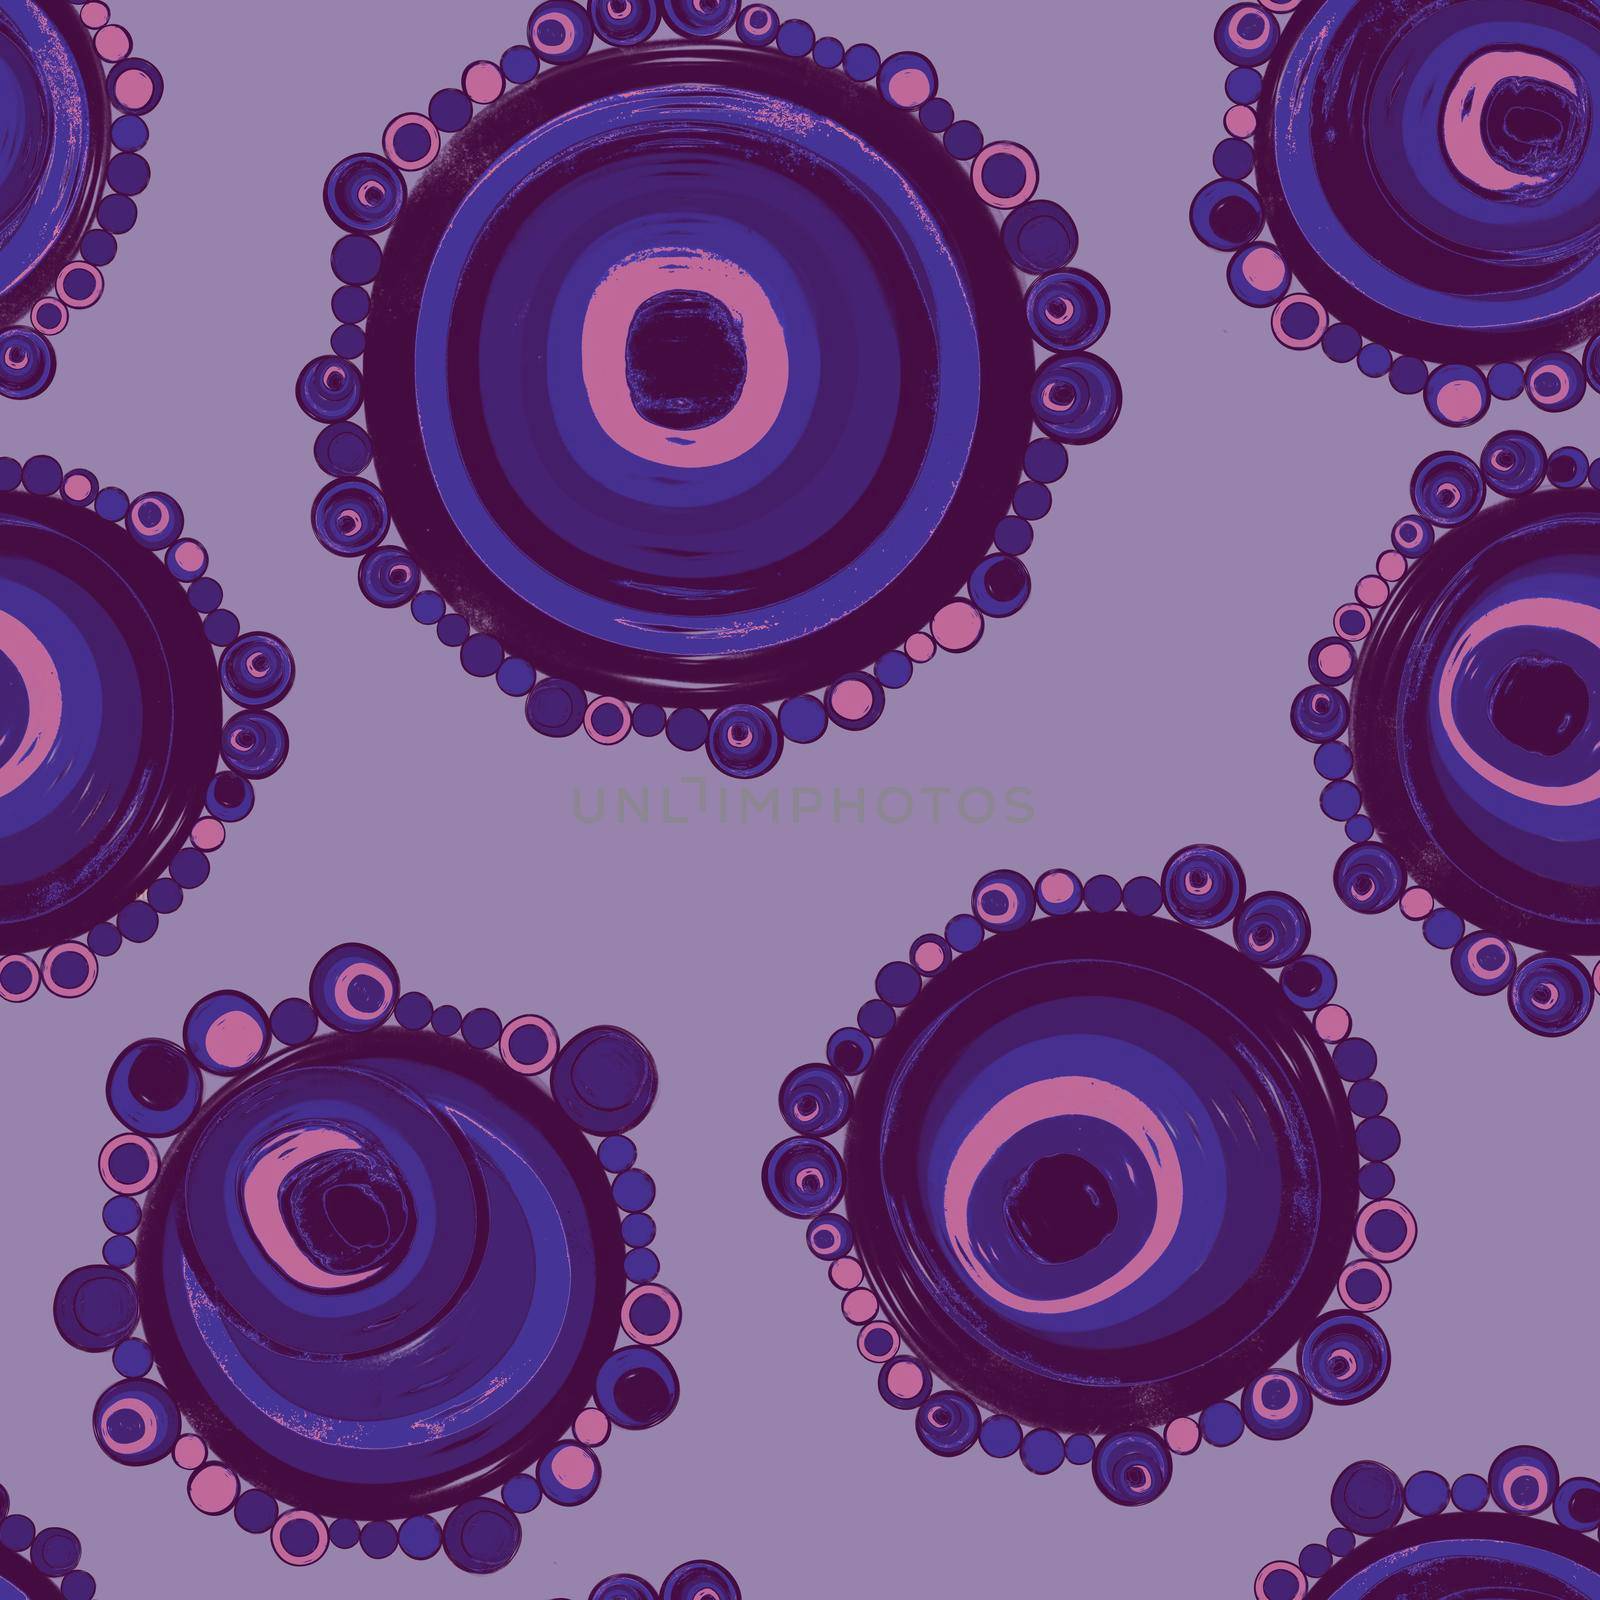 Geometric seamless pattern,texture with perfectly contacting nested circles with different size colors.Repeating pattern with circles filled with dots.For textile,wrapping paper,banner.Purple on lilac by Angelsmoon